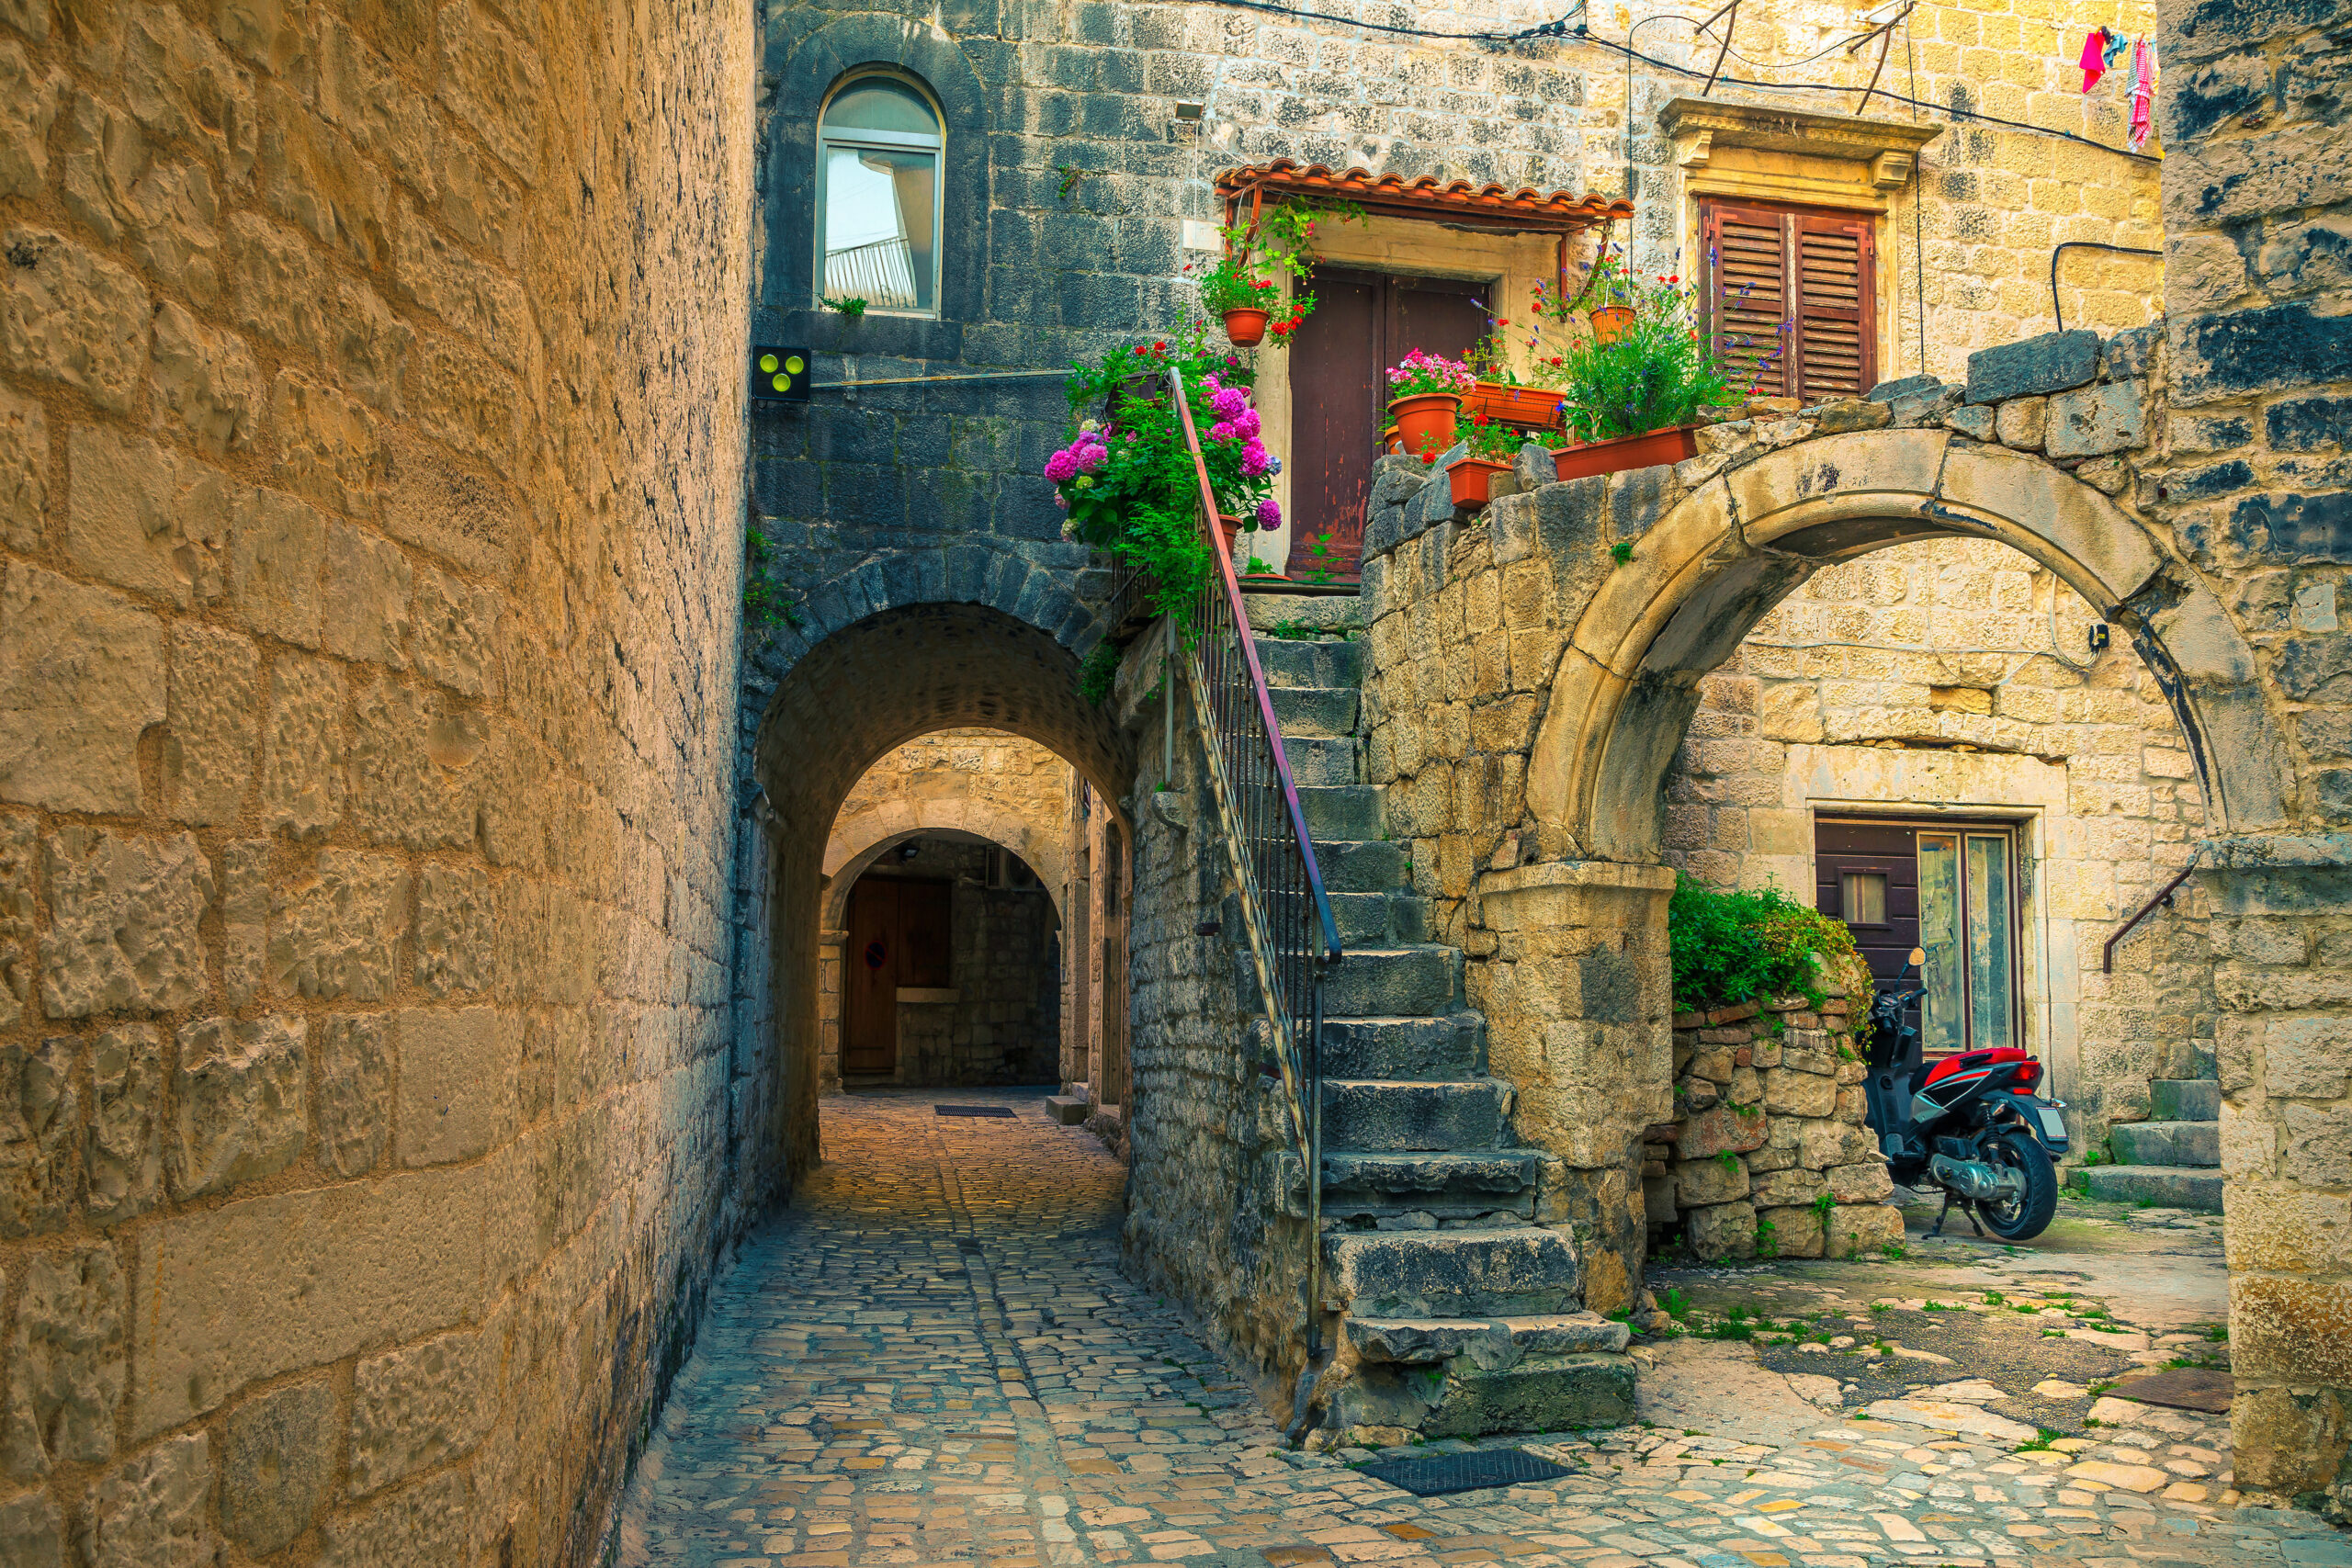 Picturesque narrow street with stone houses. Rustic stone houses and entrances decorated with flowers. Cozy street with antique houses and narrow alley.